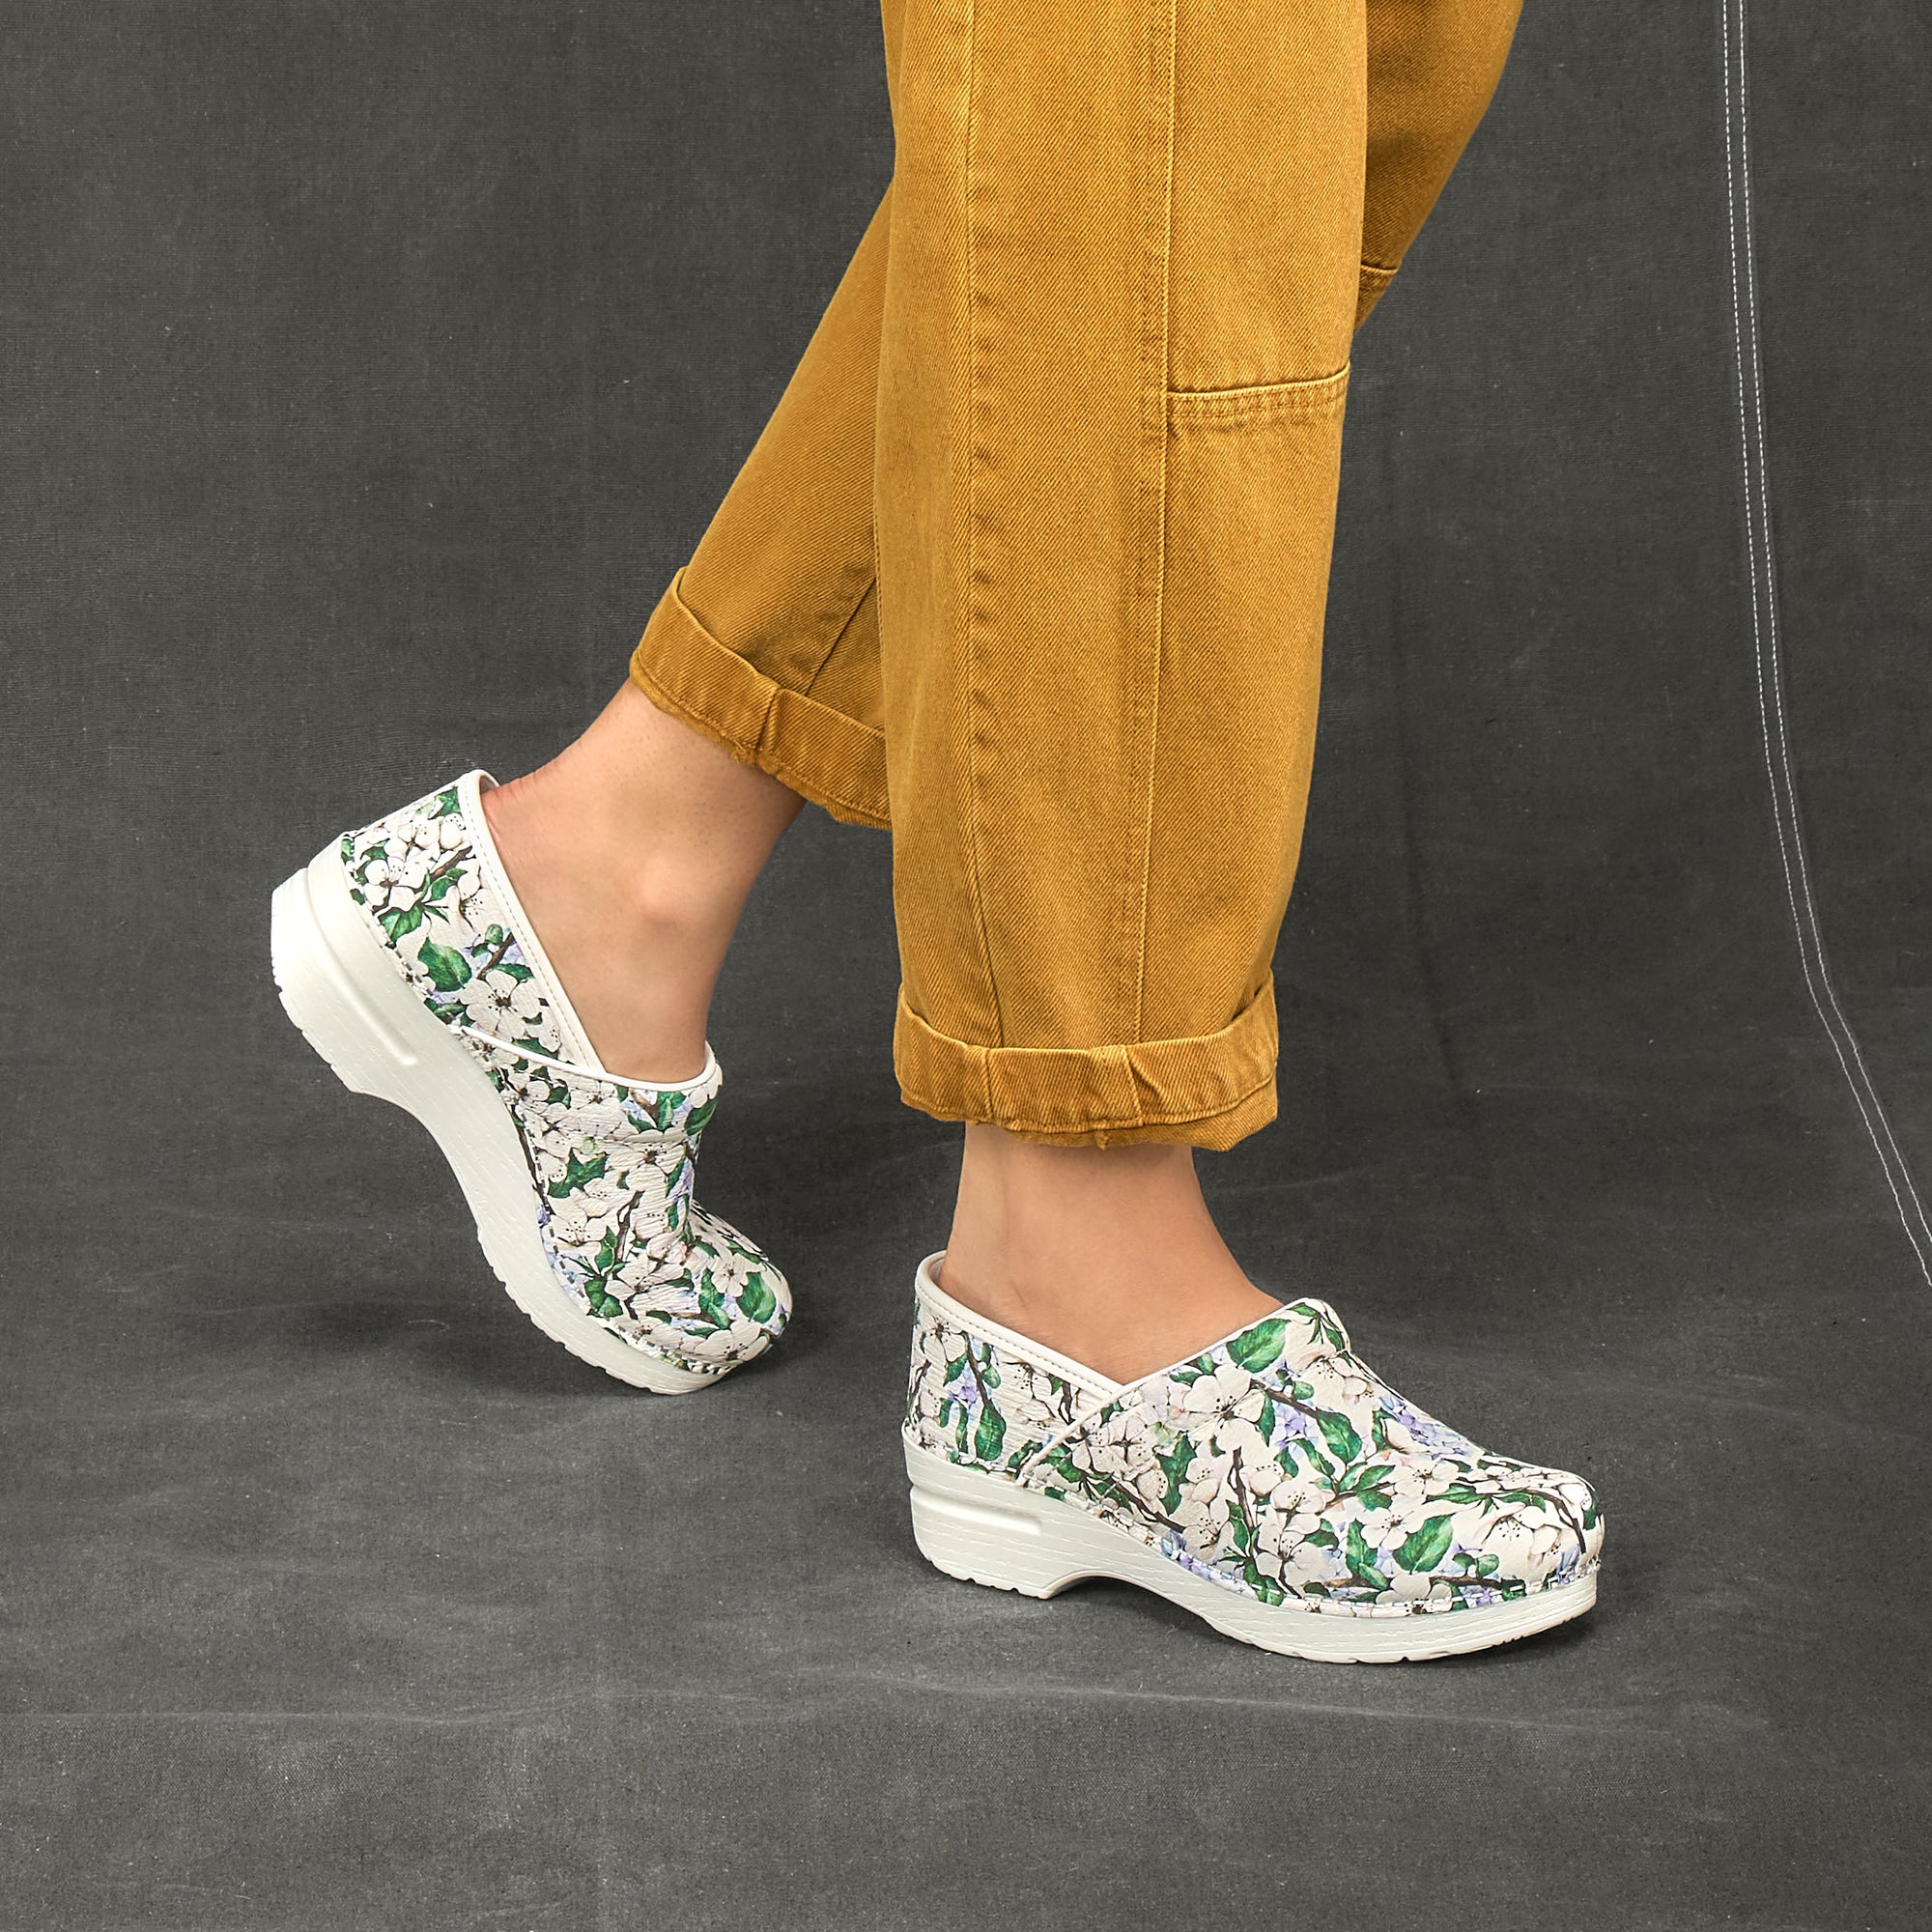 White-base clogs with a vine and flower pattern on leather uppers shown on foot.